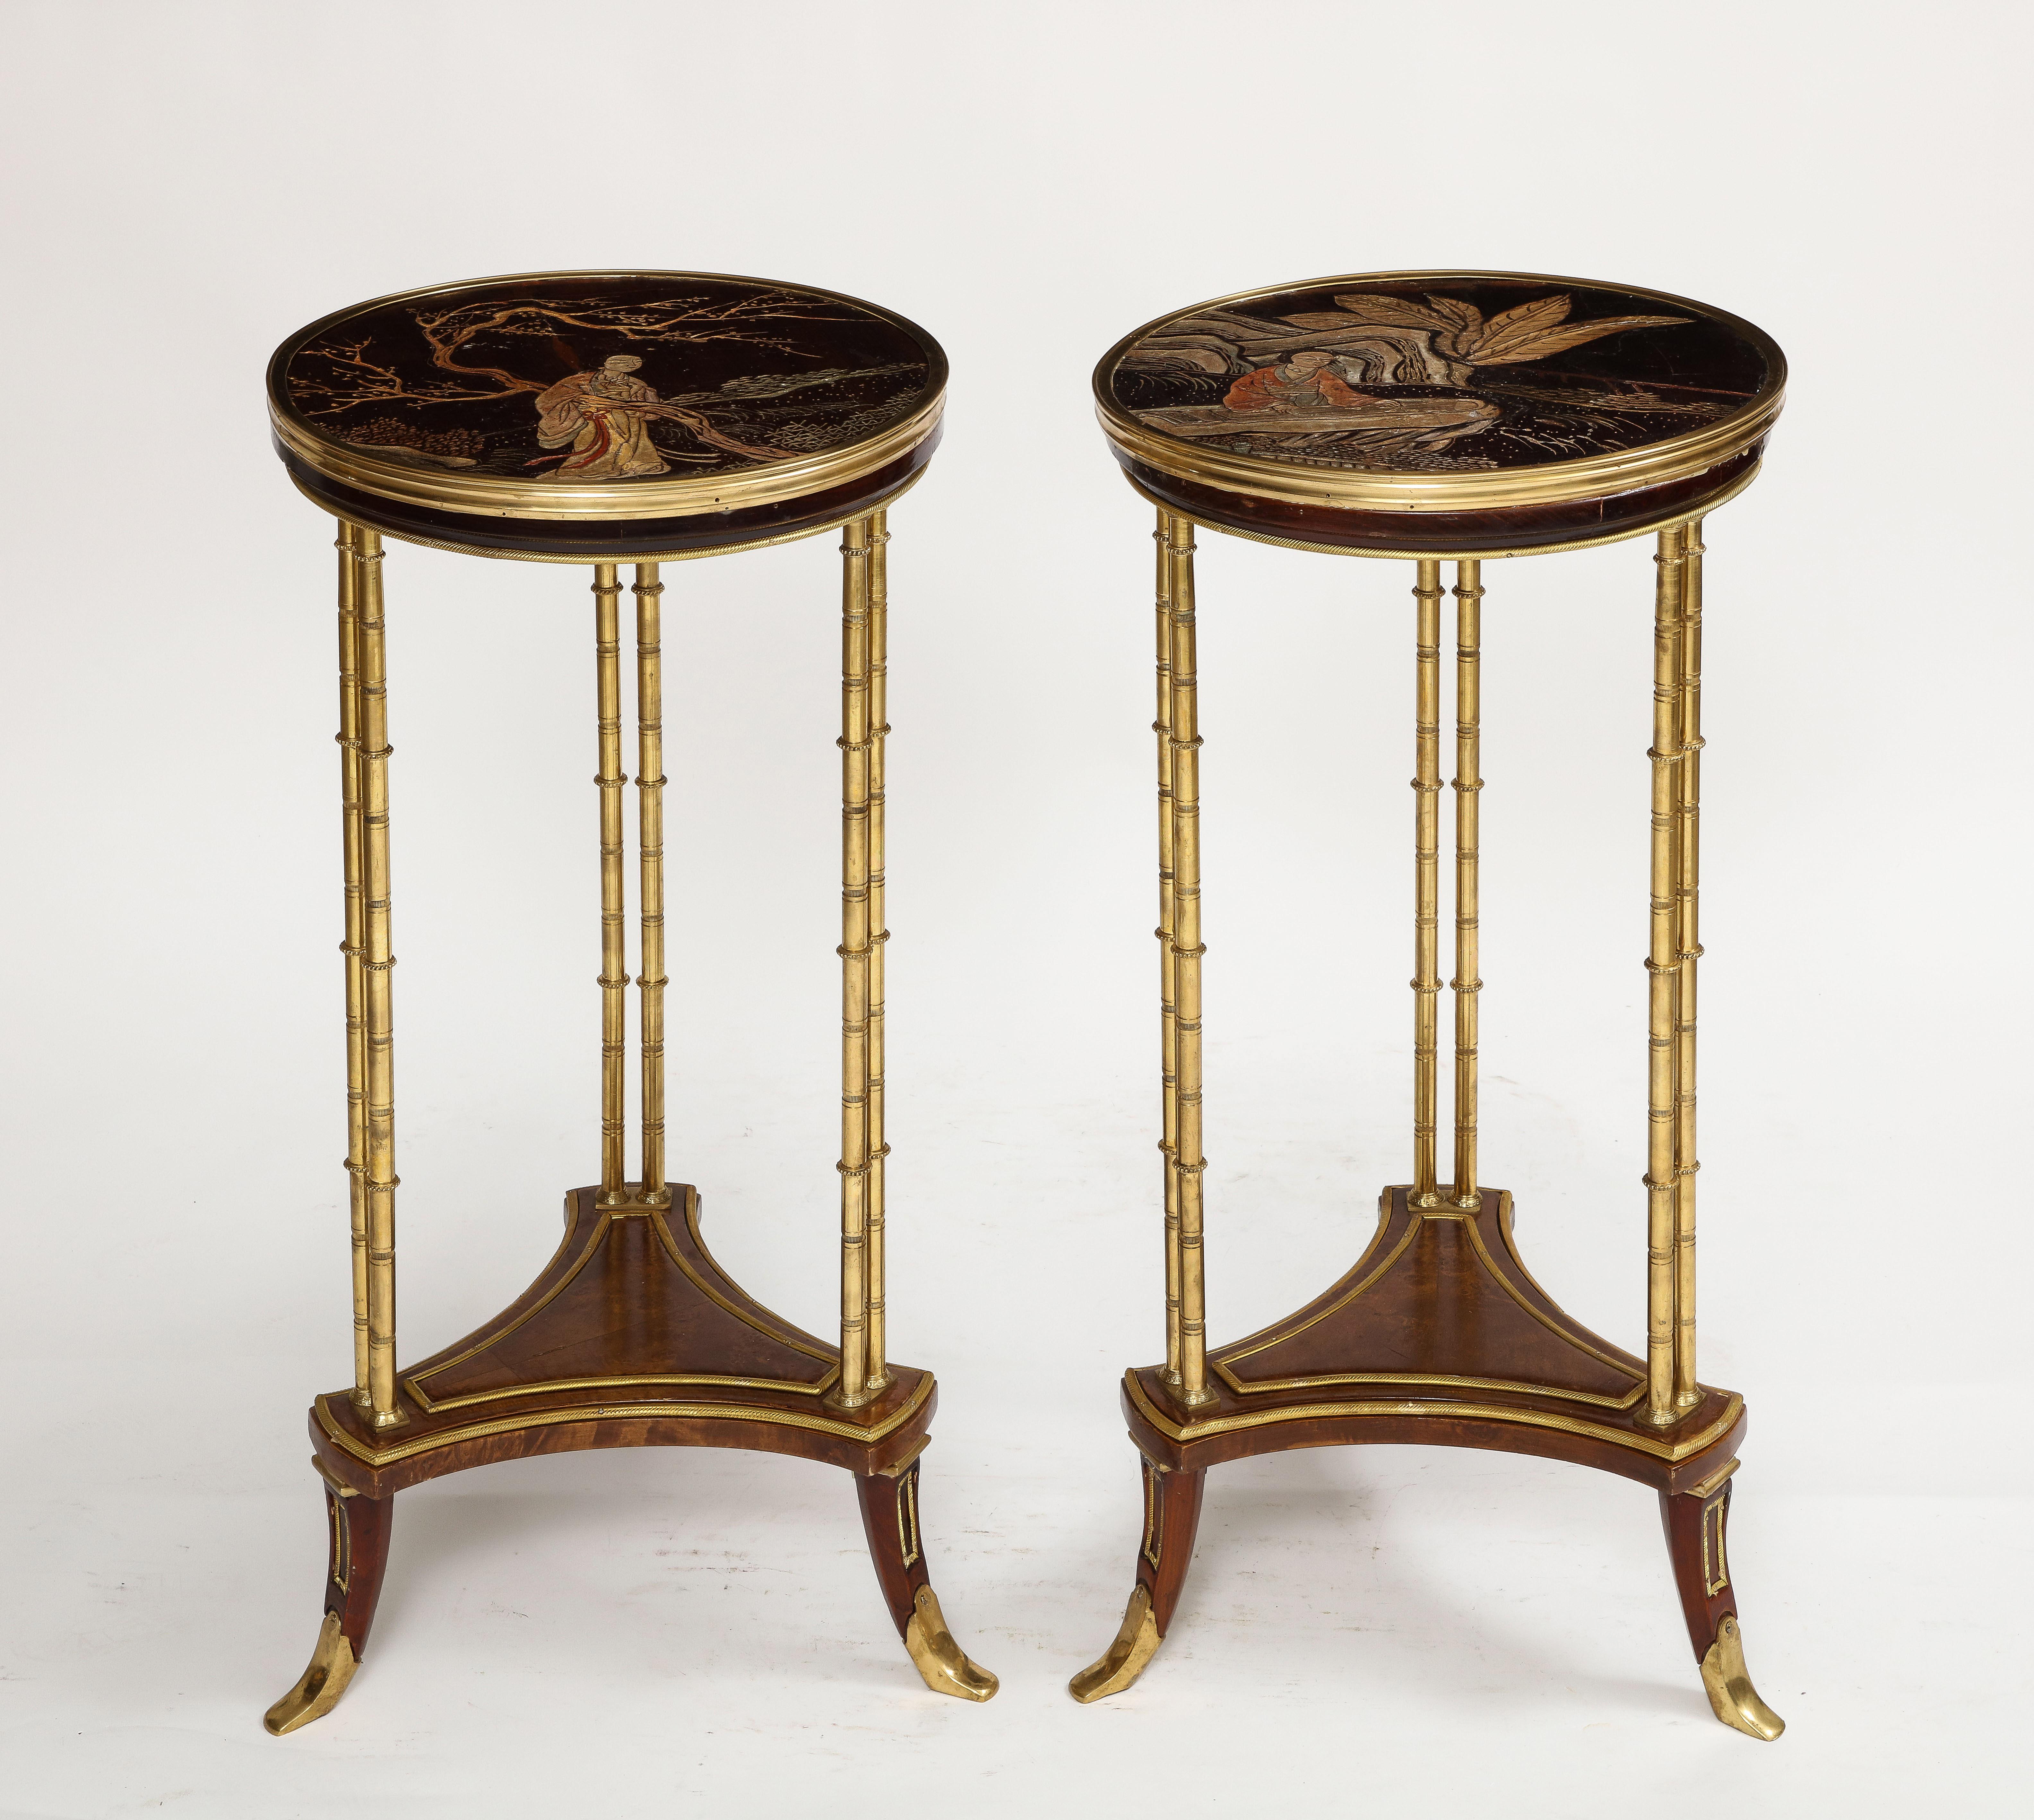 A Magnificent Pair of Maison Jansen Style French Chinoiserie Gueridon Side Tables in the manner of Adam Weisweiler. Each with Chinese lacquered Coromandel tops emblematic of Chinese figures. The legs are Gilt Bronze ormolu and wonderfully designed